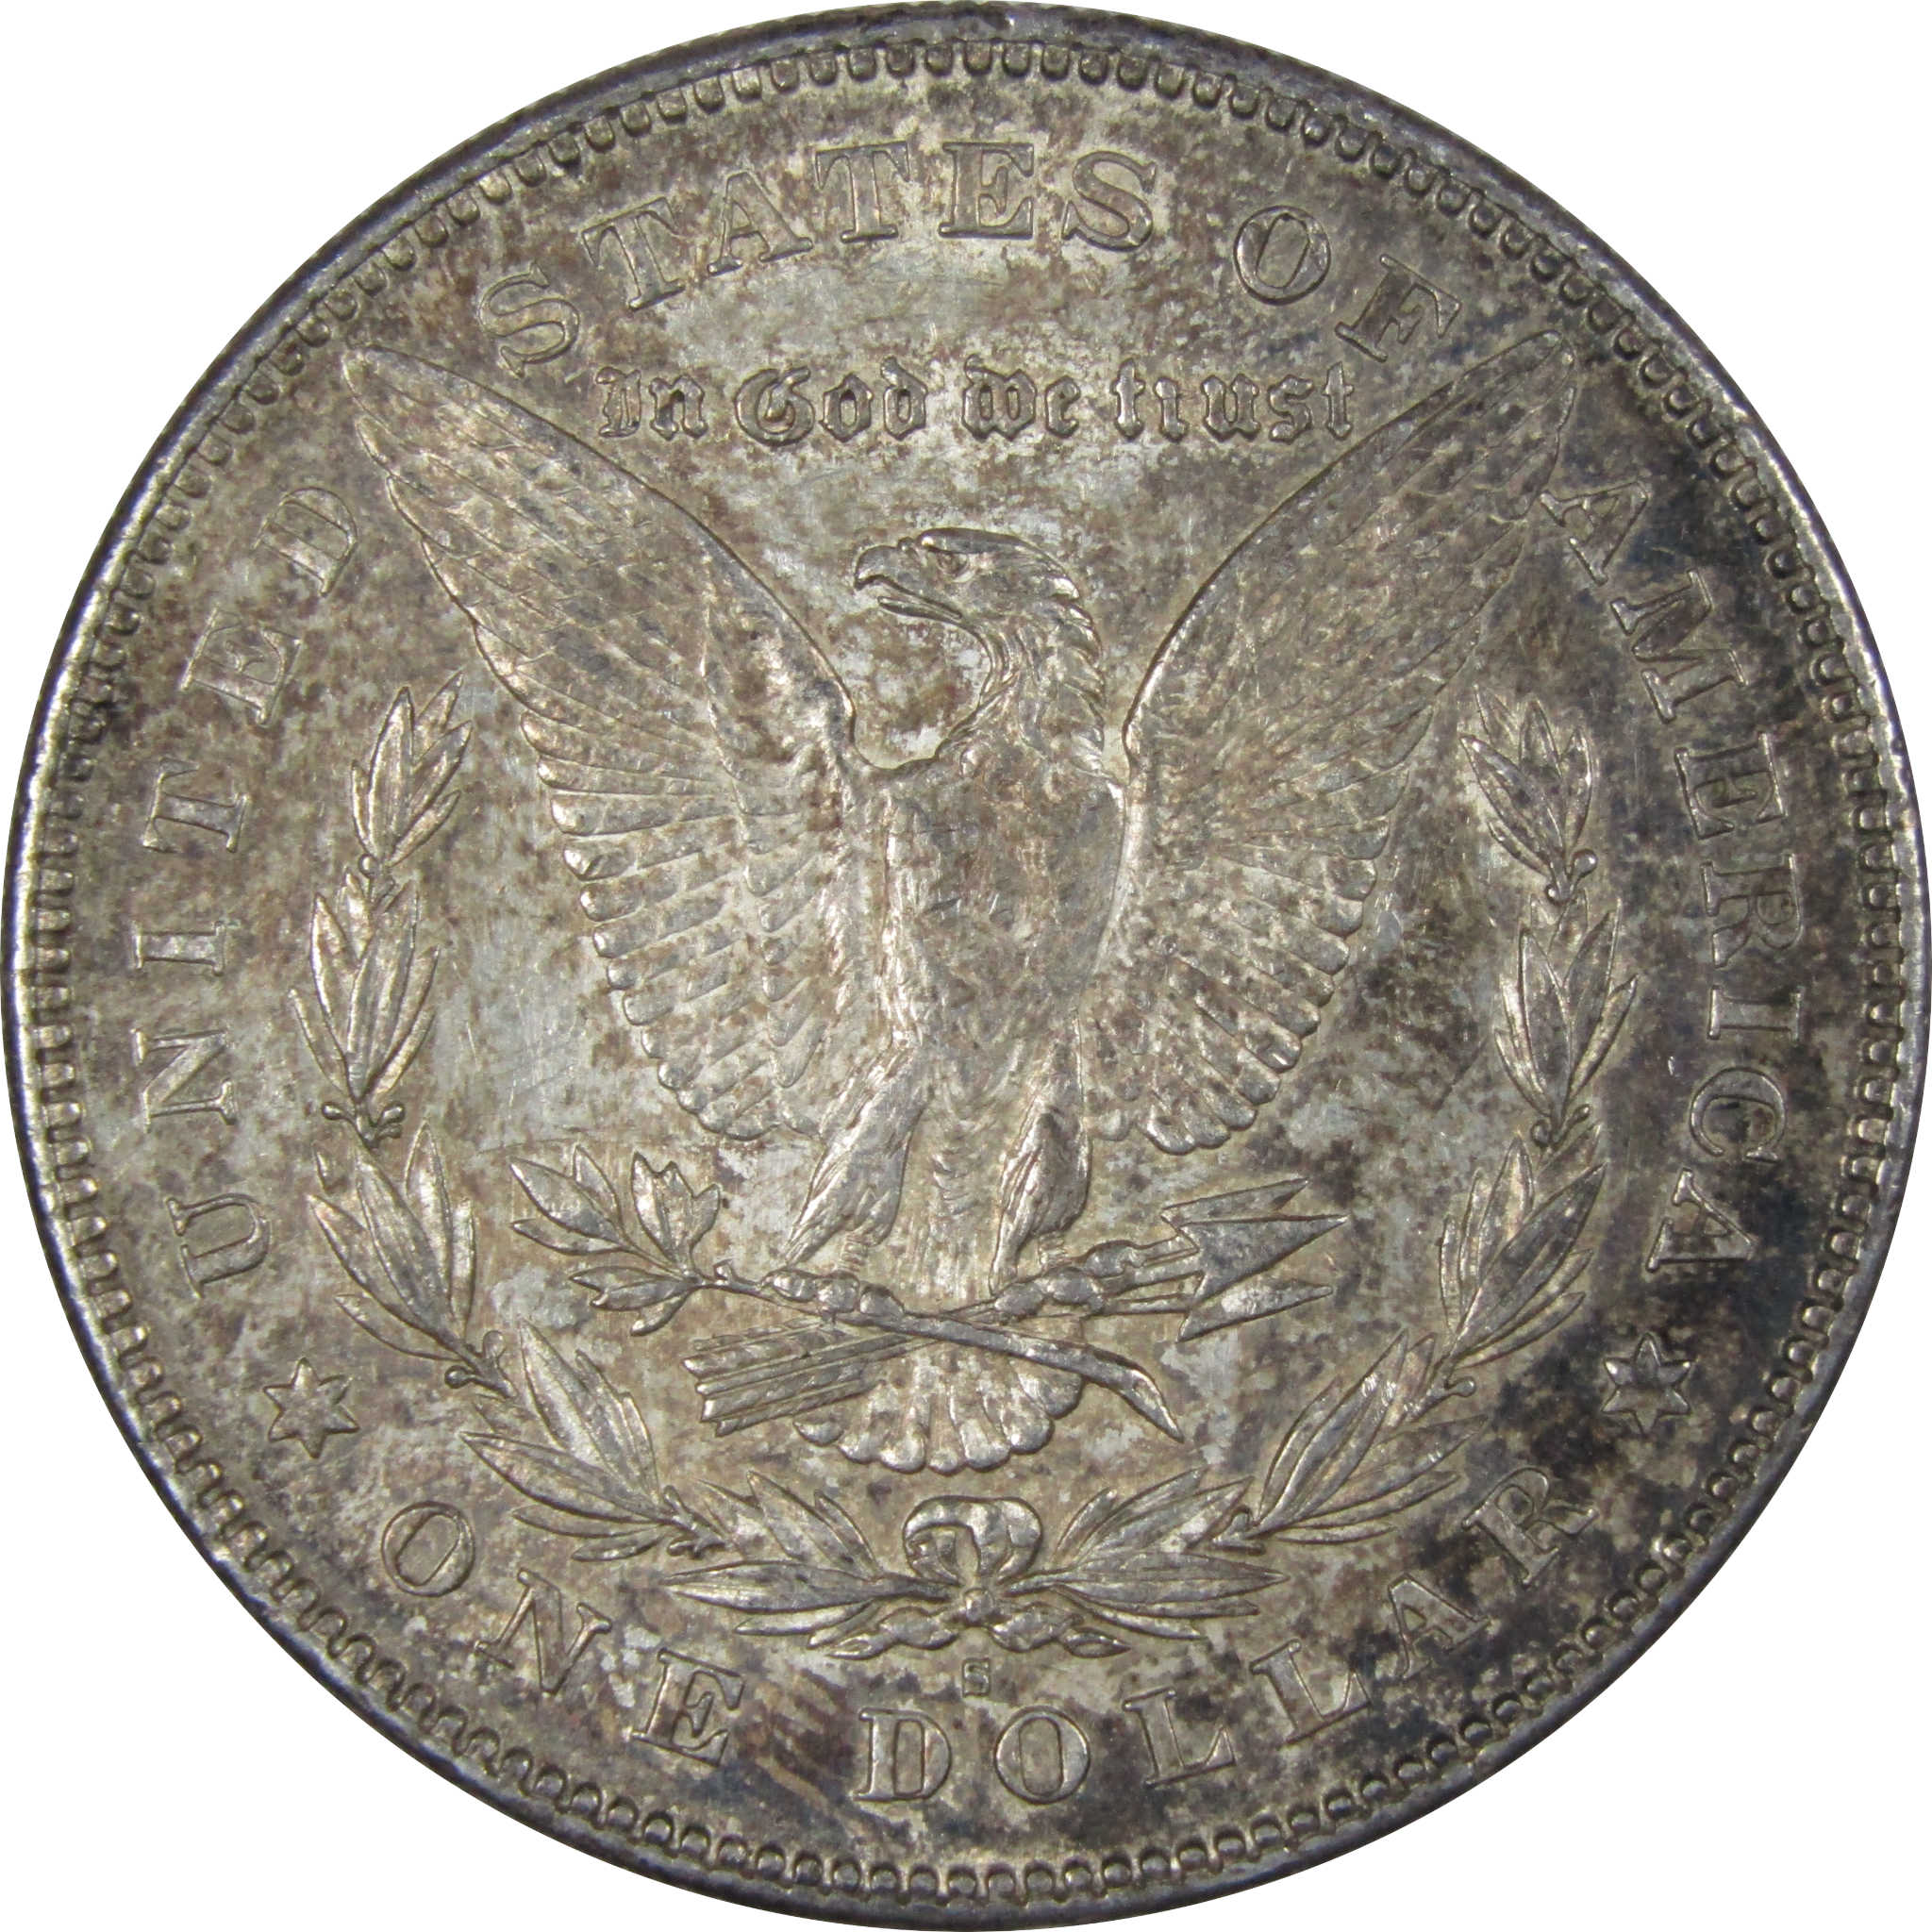 1878 S Morgan Dollar XF EF Extremely Fine 90% Silver SKU:IPC8267 - Morgan coin - Morgan silver dollar - Morgan silver dollar for sale - Profile Coins &amp; Collectibles